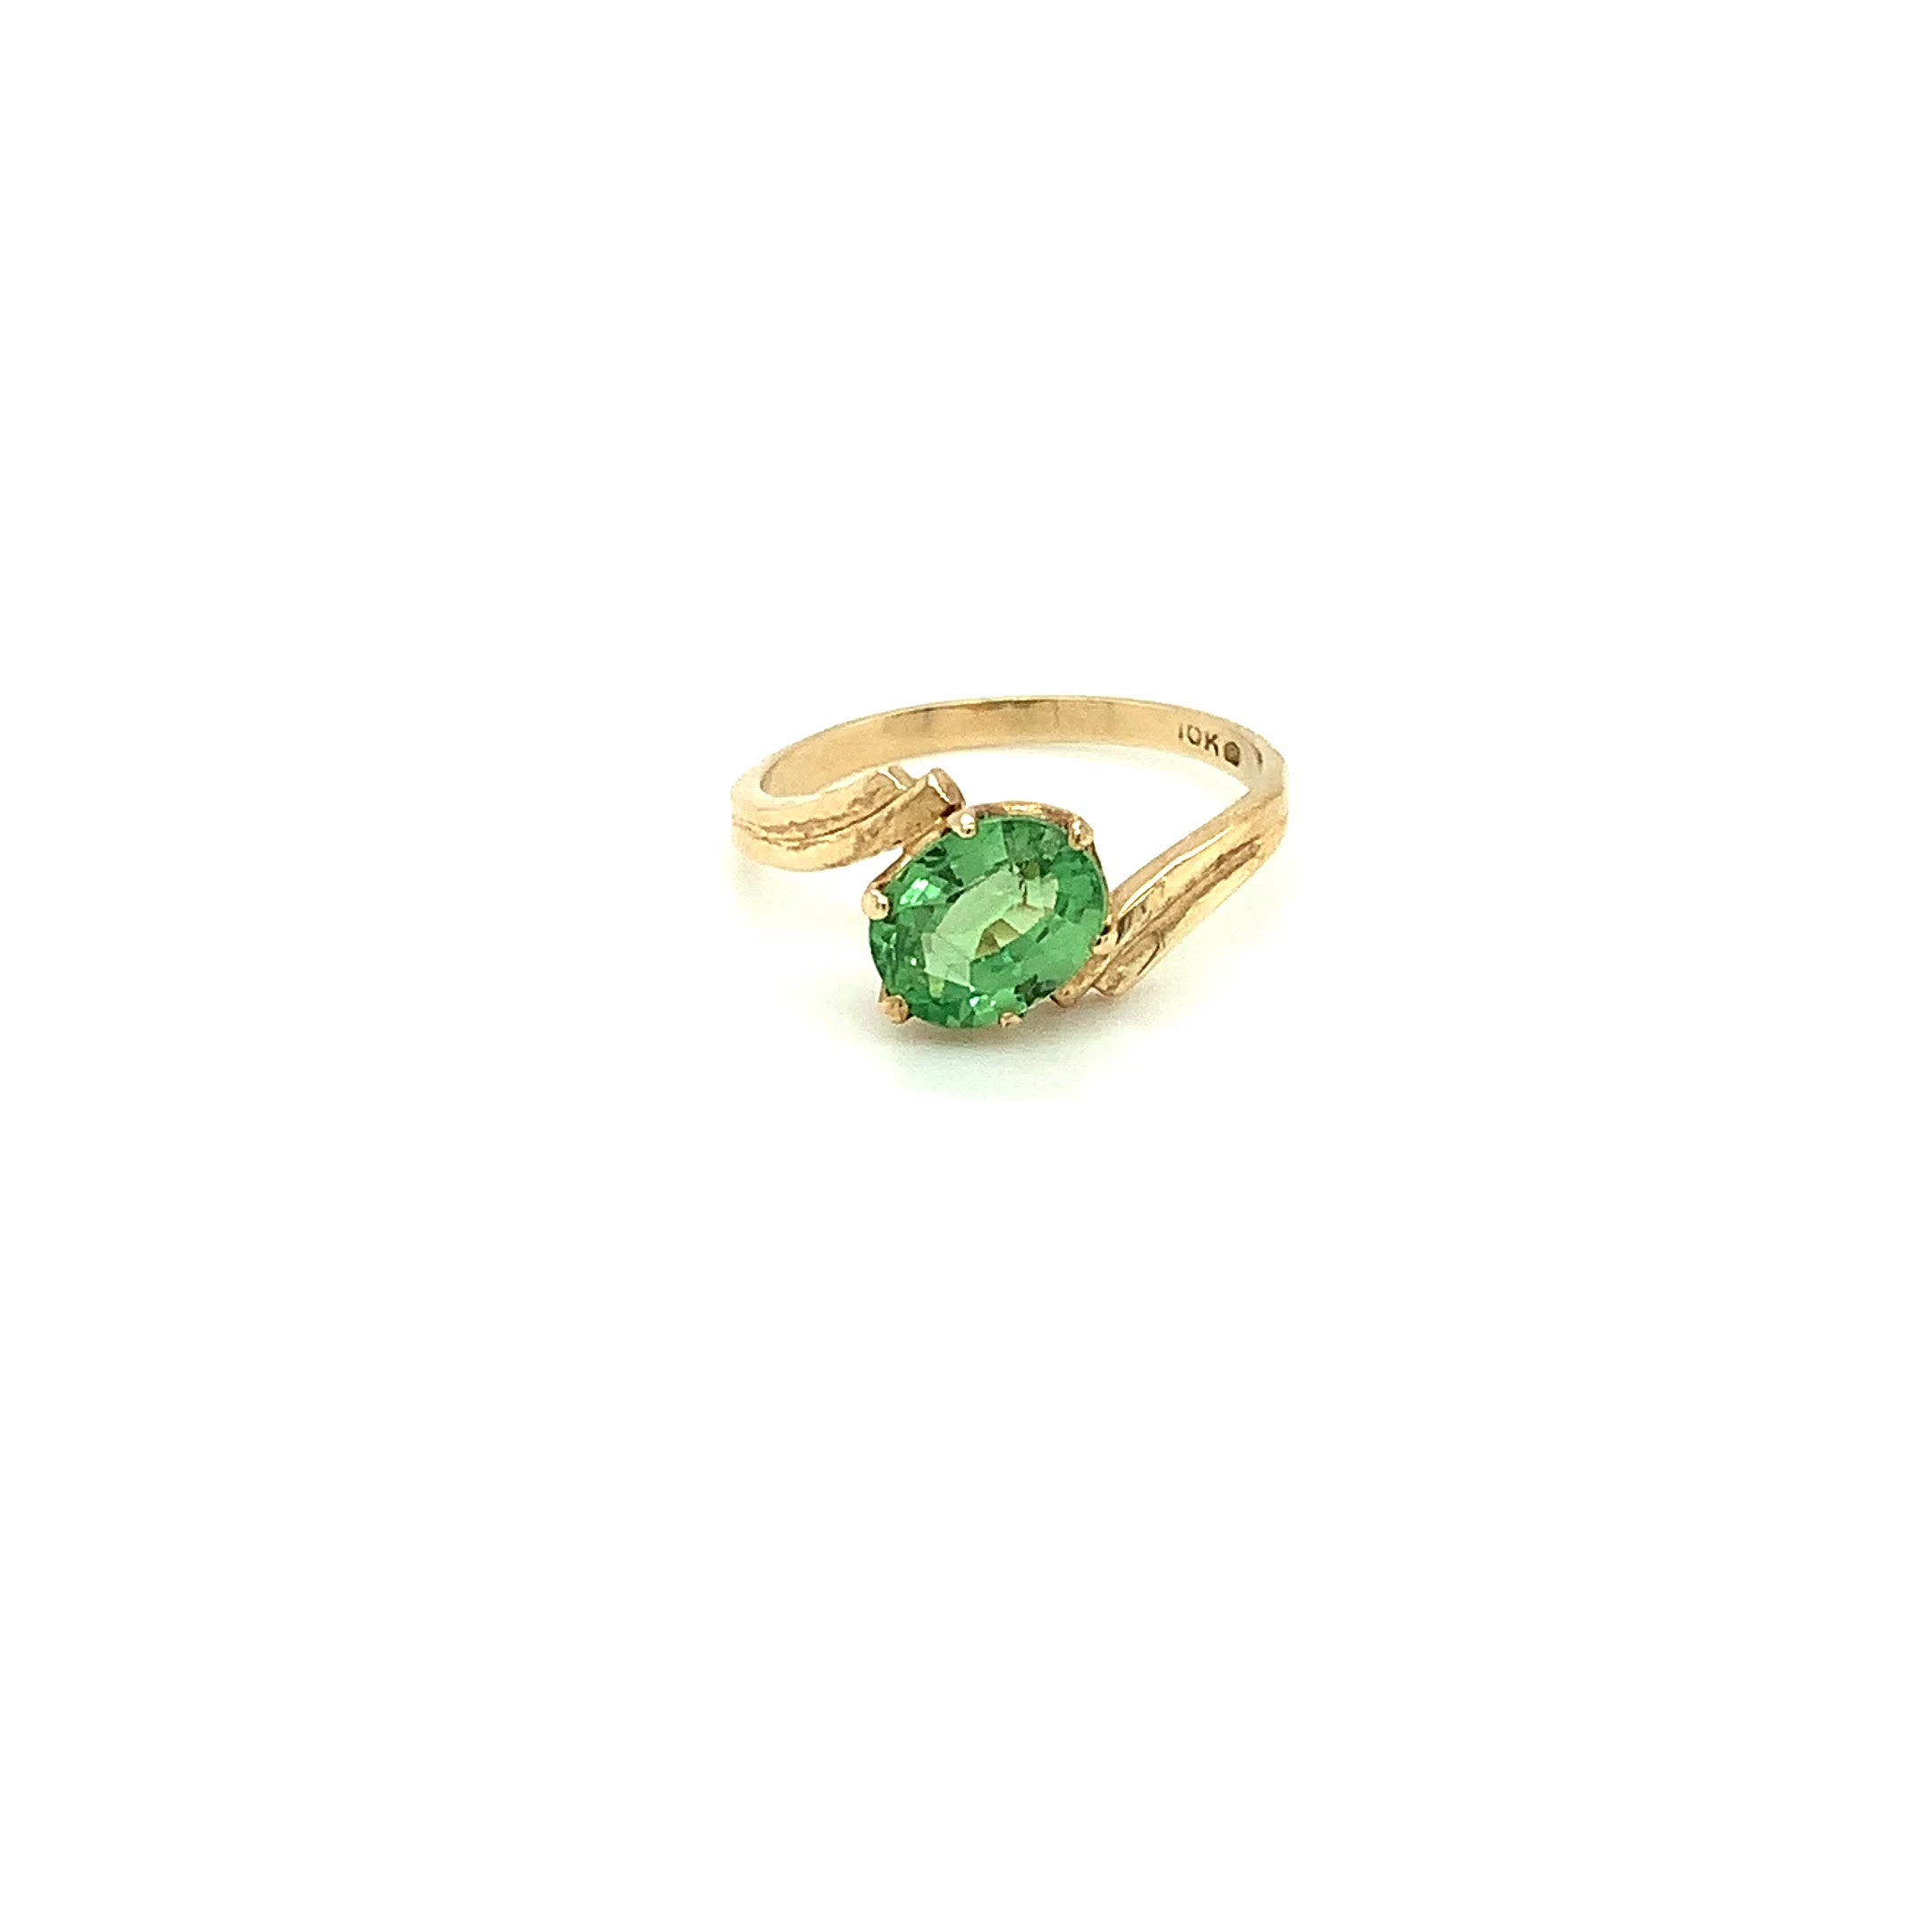 Natural Color Change Garnet Ring 10K Solid Gold 1.66ct Solitaire Ring Green Ring January Birthstone Ring Gemstone Ring Women's Ring Jewelry